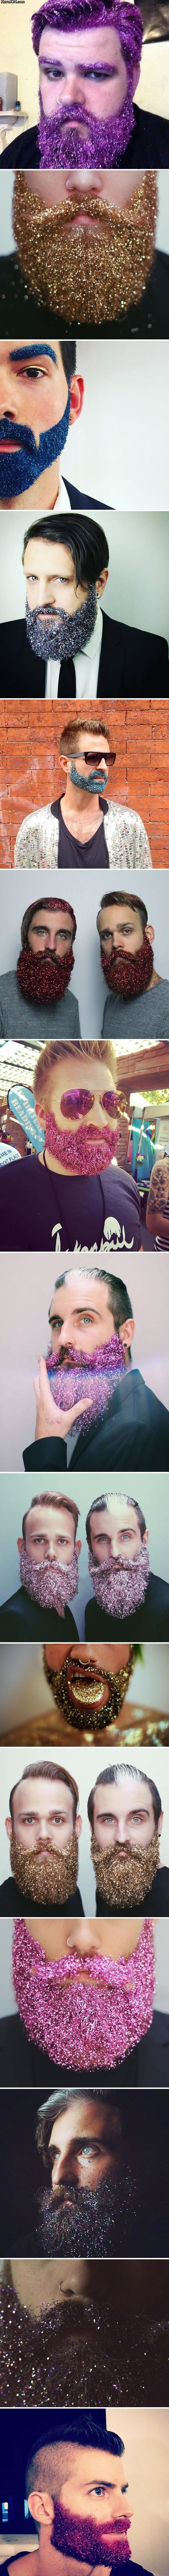 covering_their_beards_in_glitter_to_celebrate_the_holidays.jpg